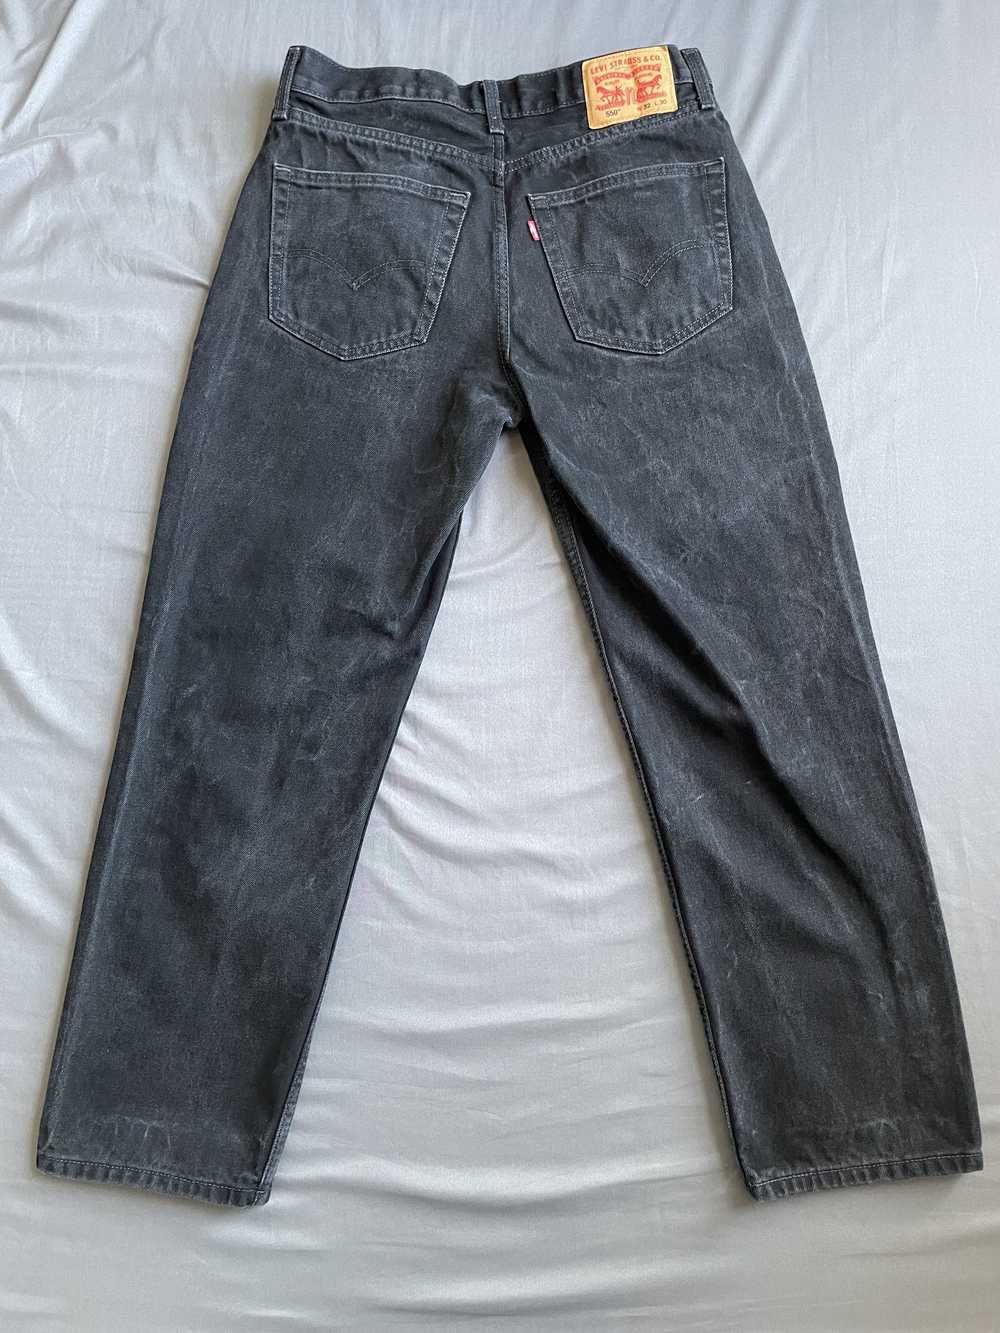 Levi's 550 Relaxed Fit Jeans - image 3